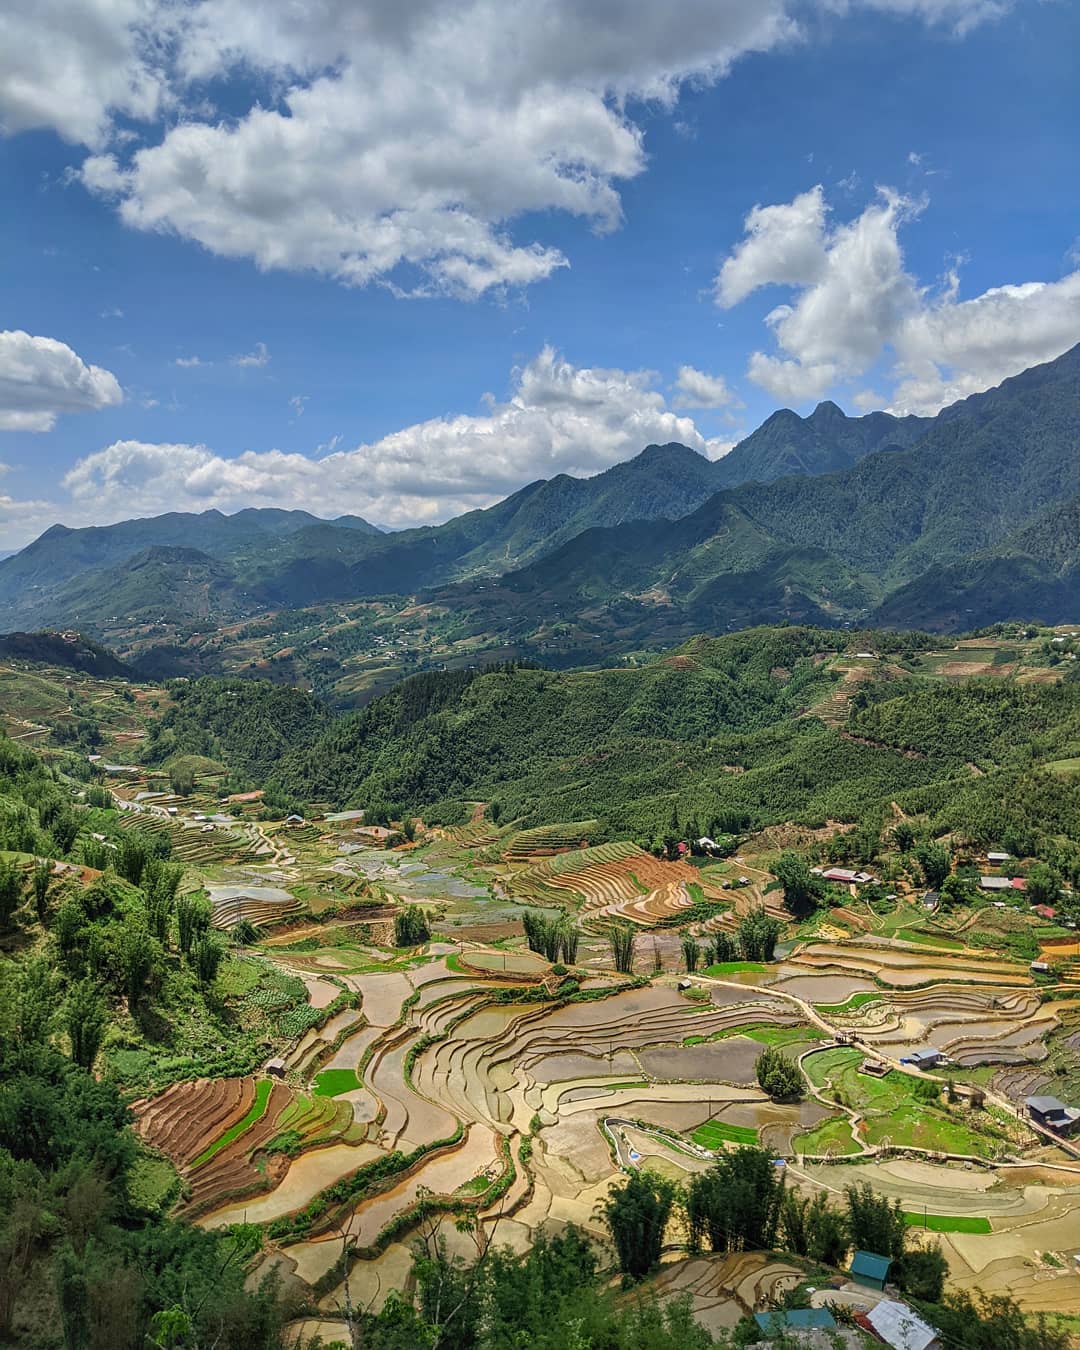 The rice terraces in Mu Cang Chai are seen in a photo captured by Katie Lockhart.